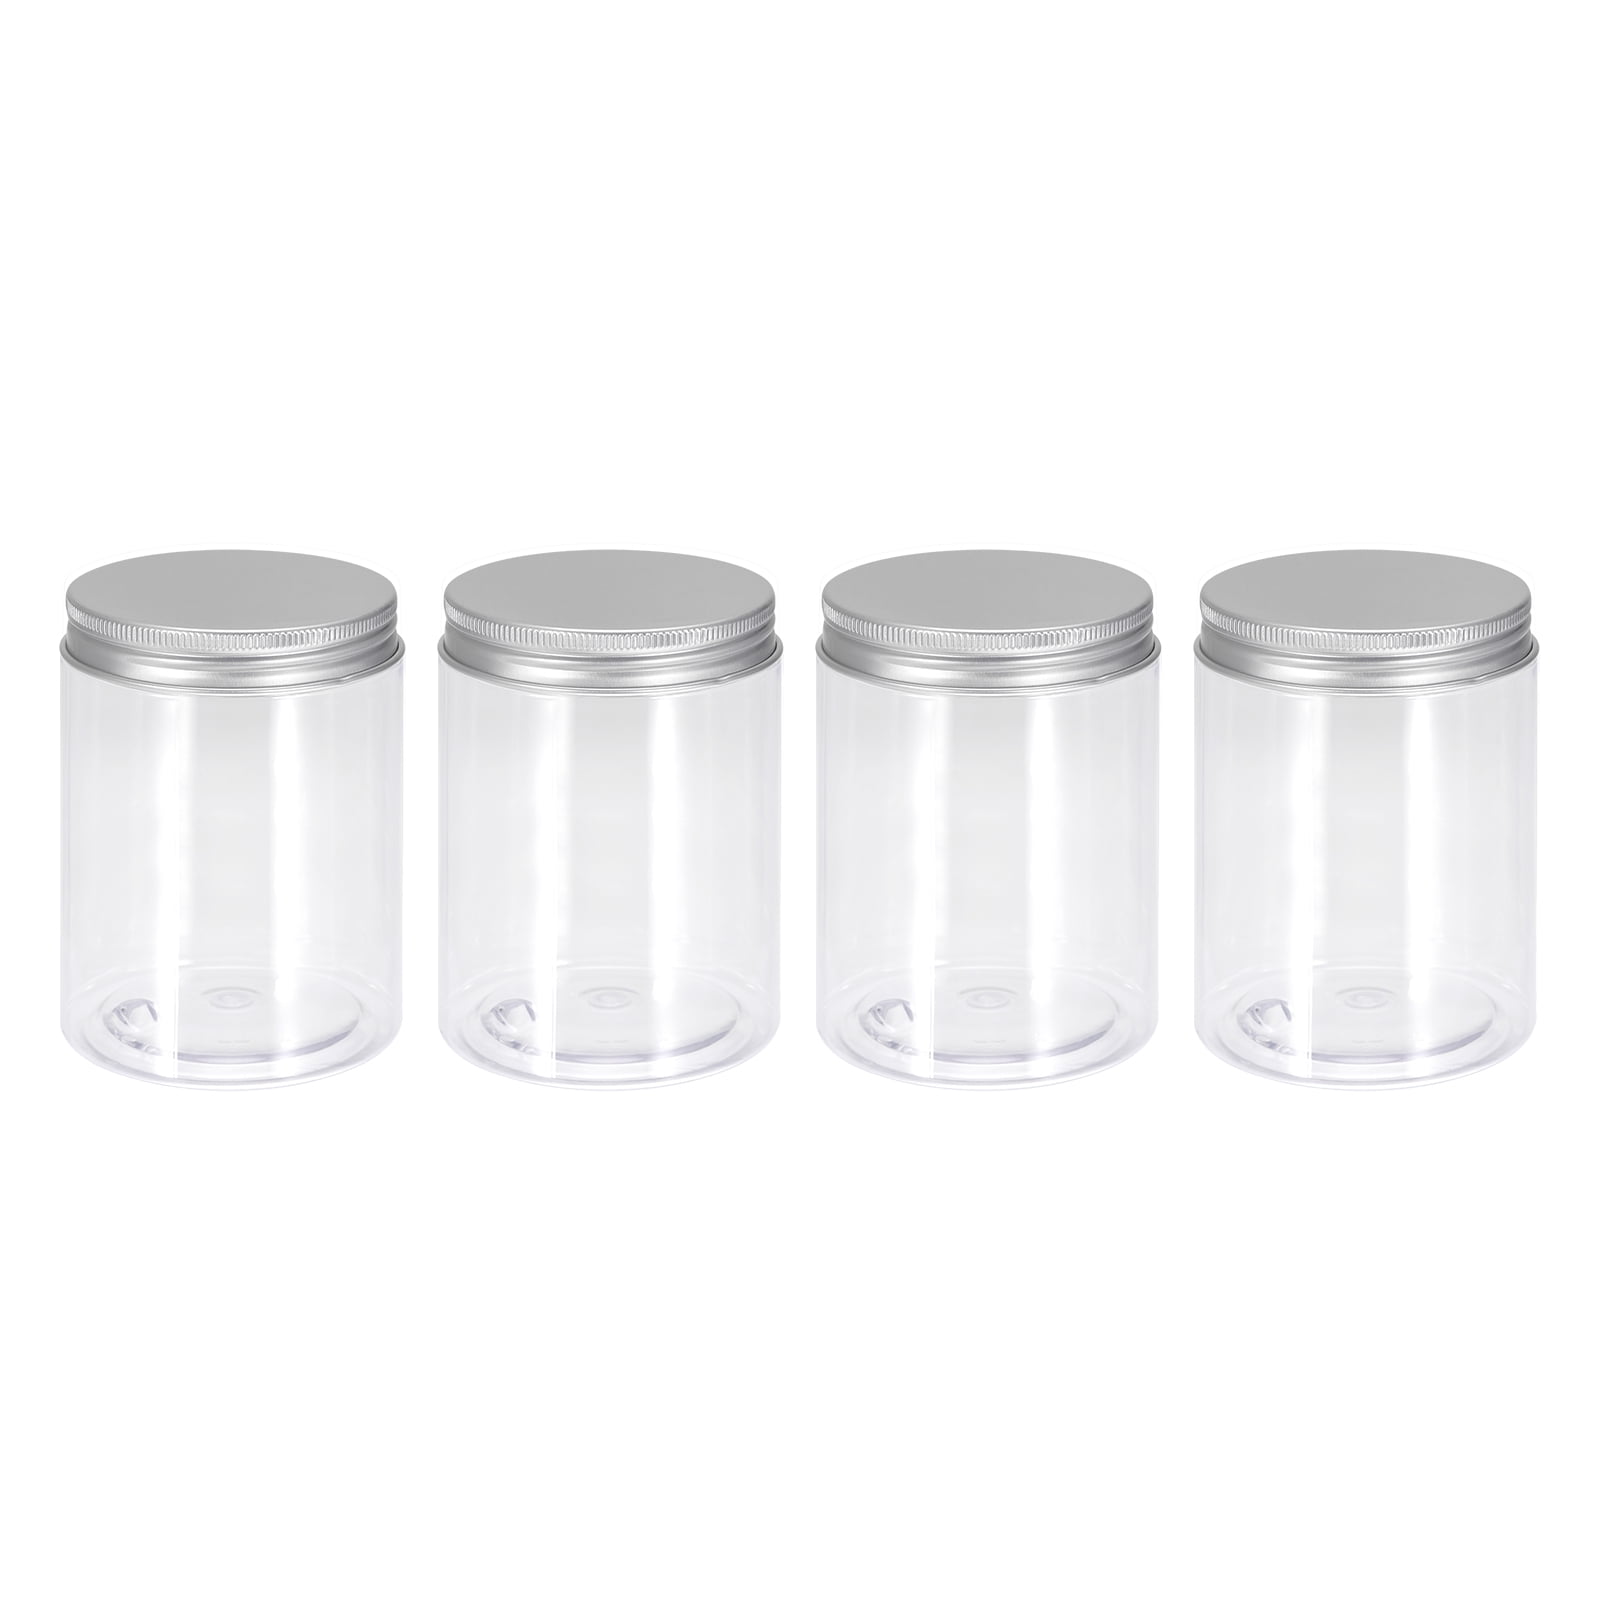 Paksh Novelty - Food Storage Container - Glass Jars with Silver Metal Airtight Lids for Meal Prep, (10 Pack) (8 Ounce)